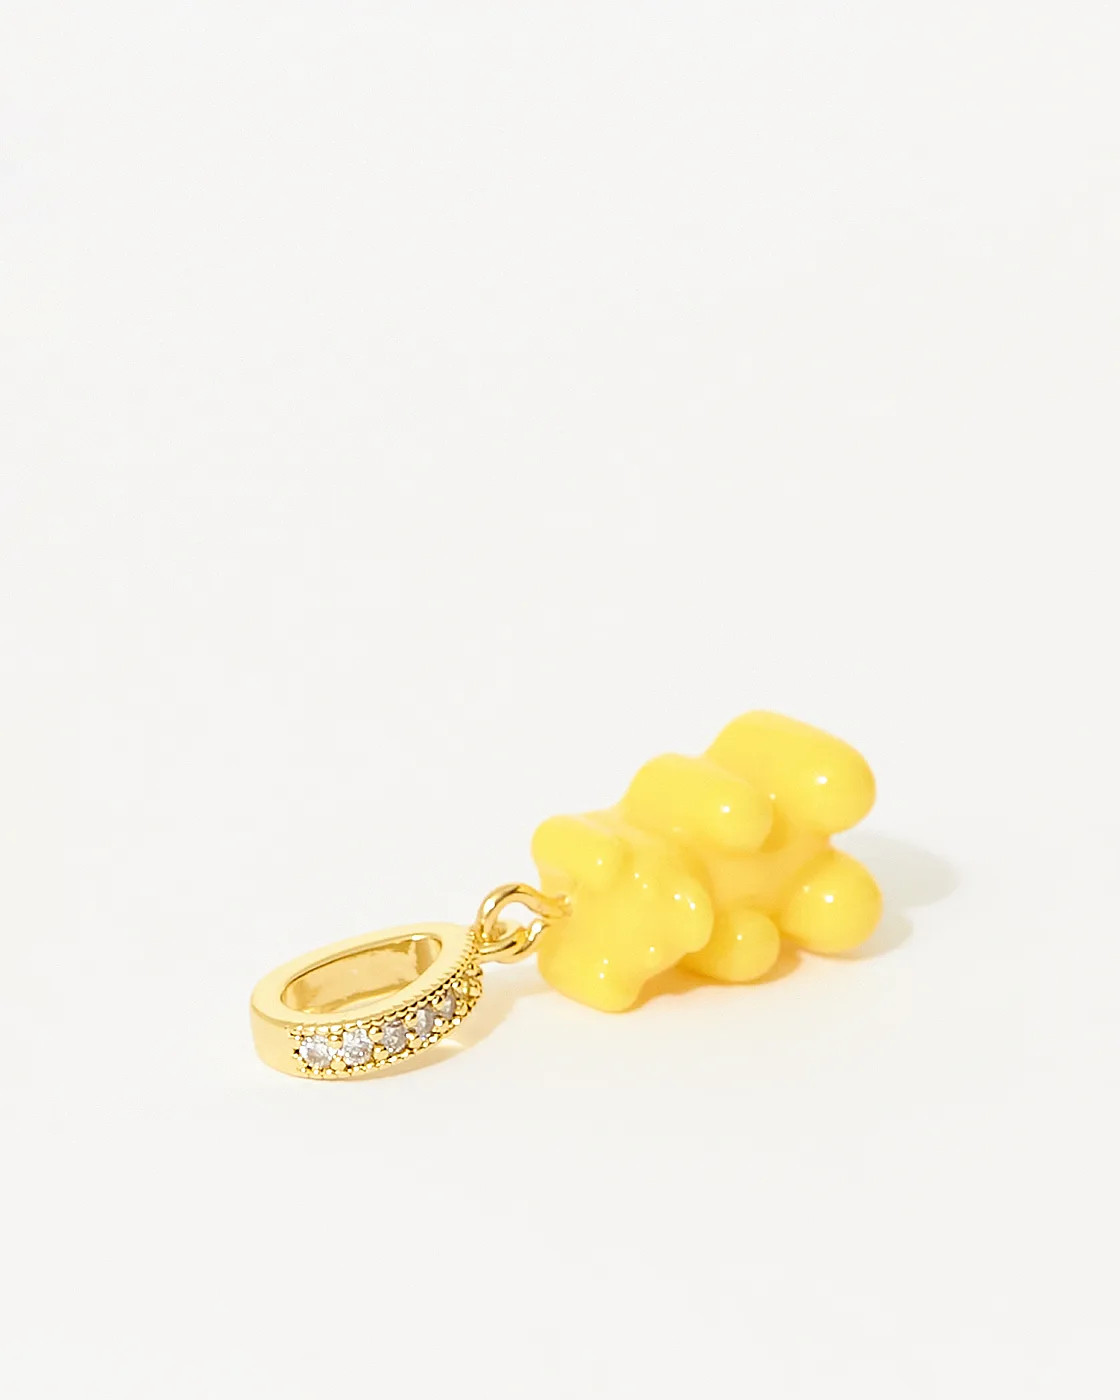 Nostalgia Bear Gold-Plated Resin Pendant with Pave Connector - NYC Taxi yellow